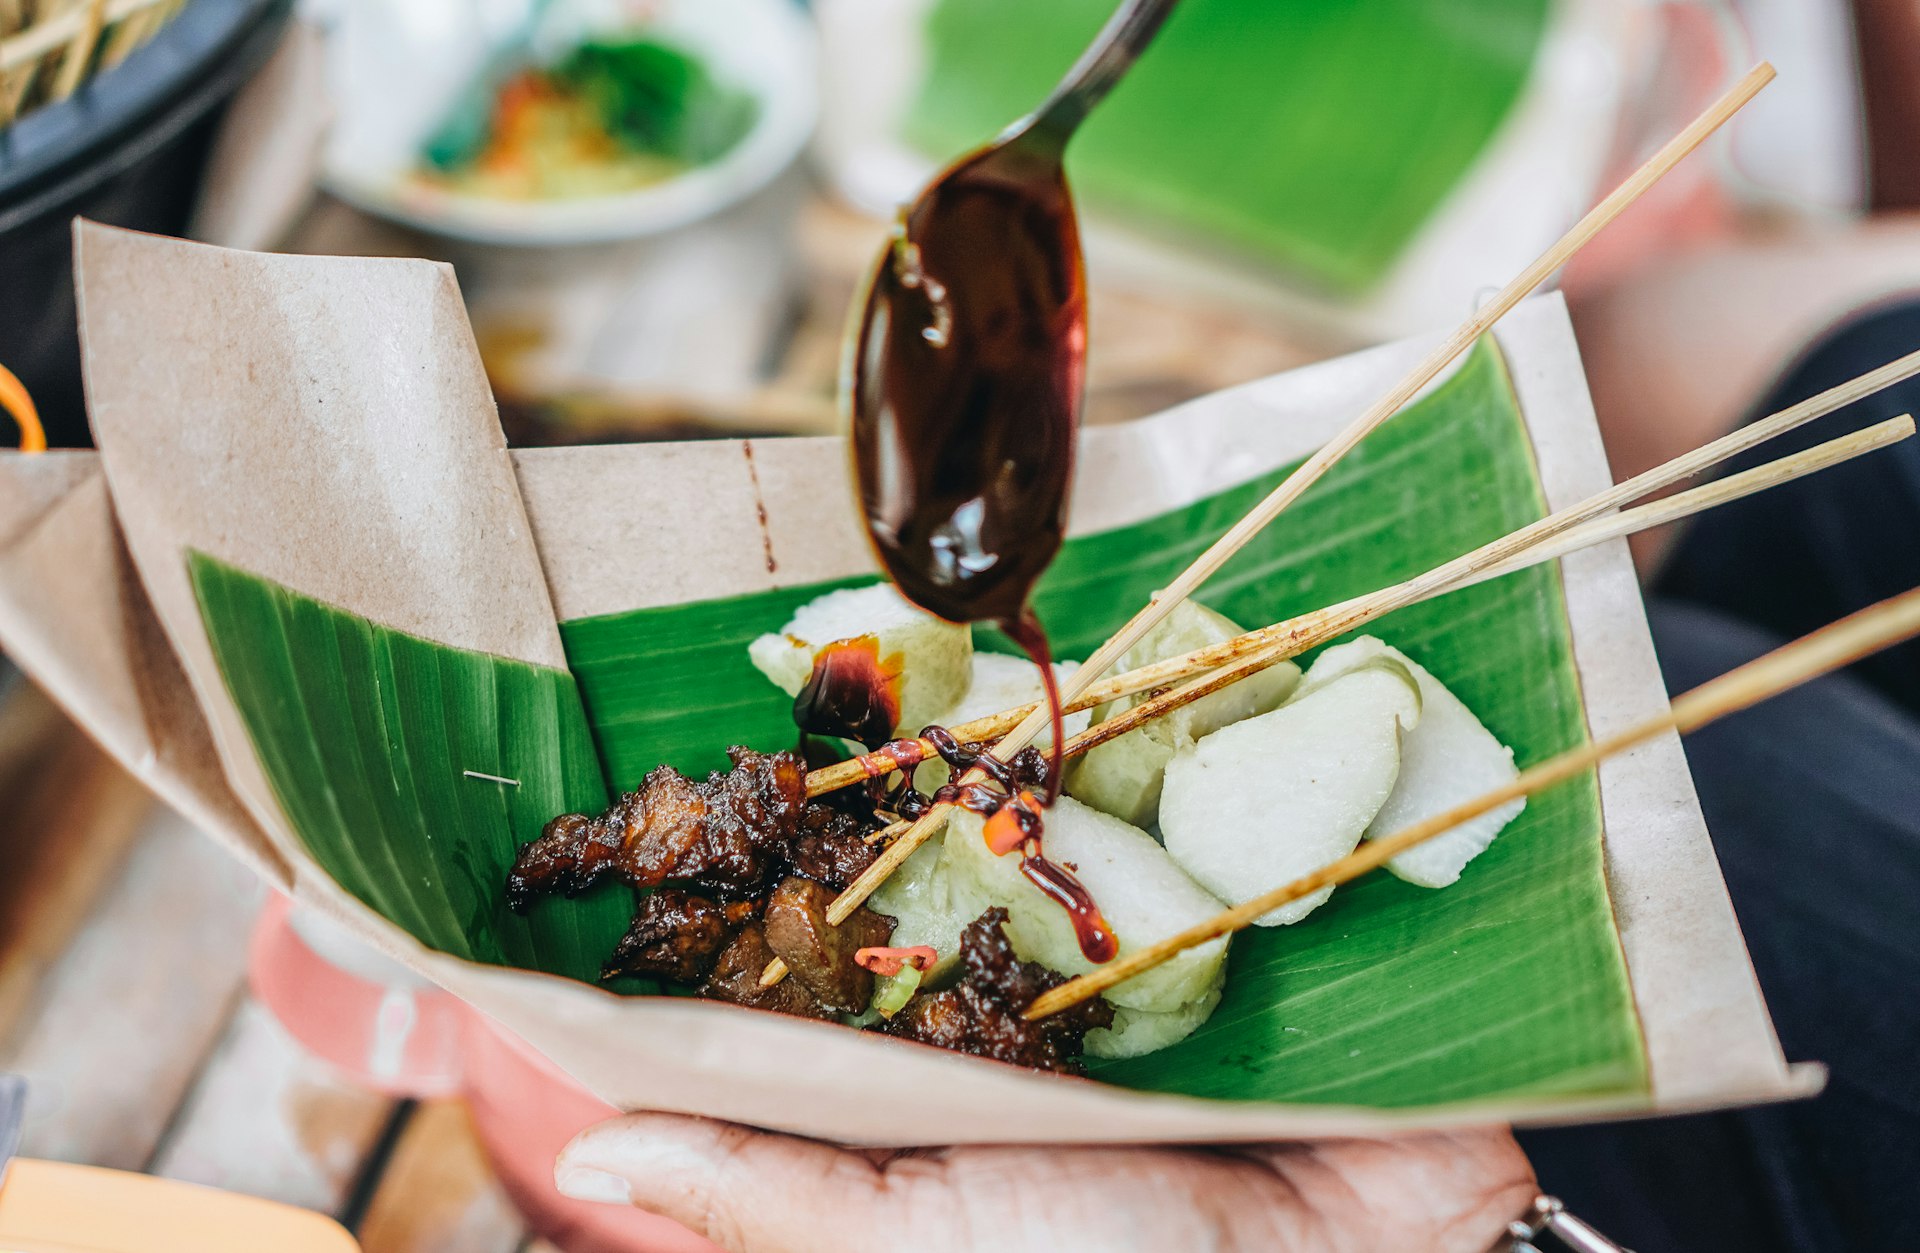 A banana leaf containing rice cake and meat skewers as a dark brown sauce drips onto the meat from a spoon